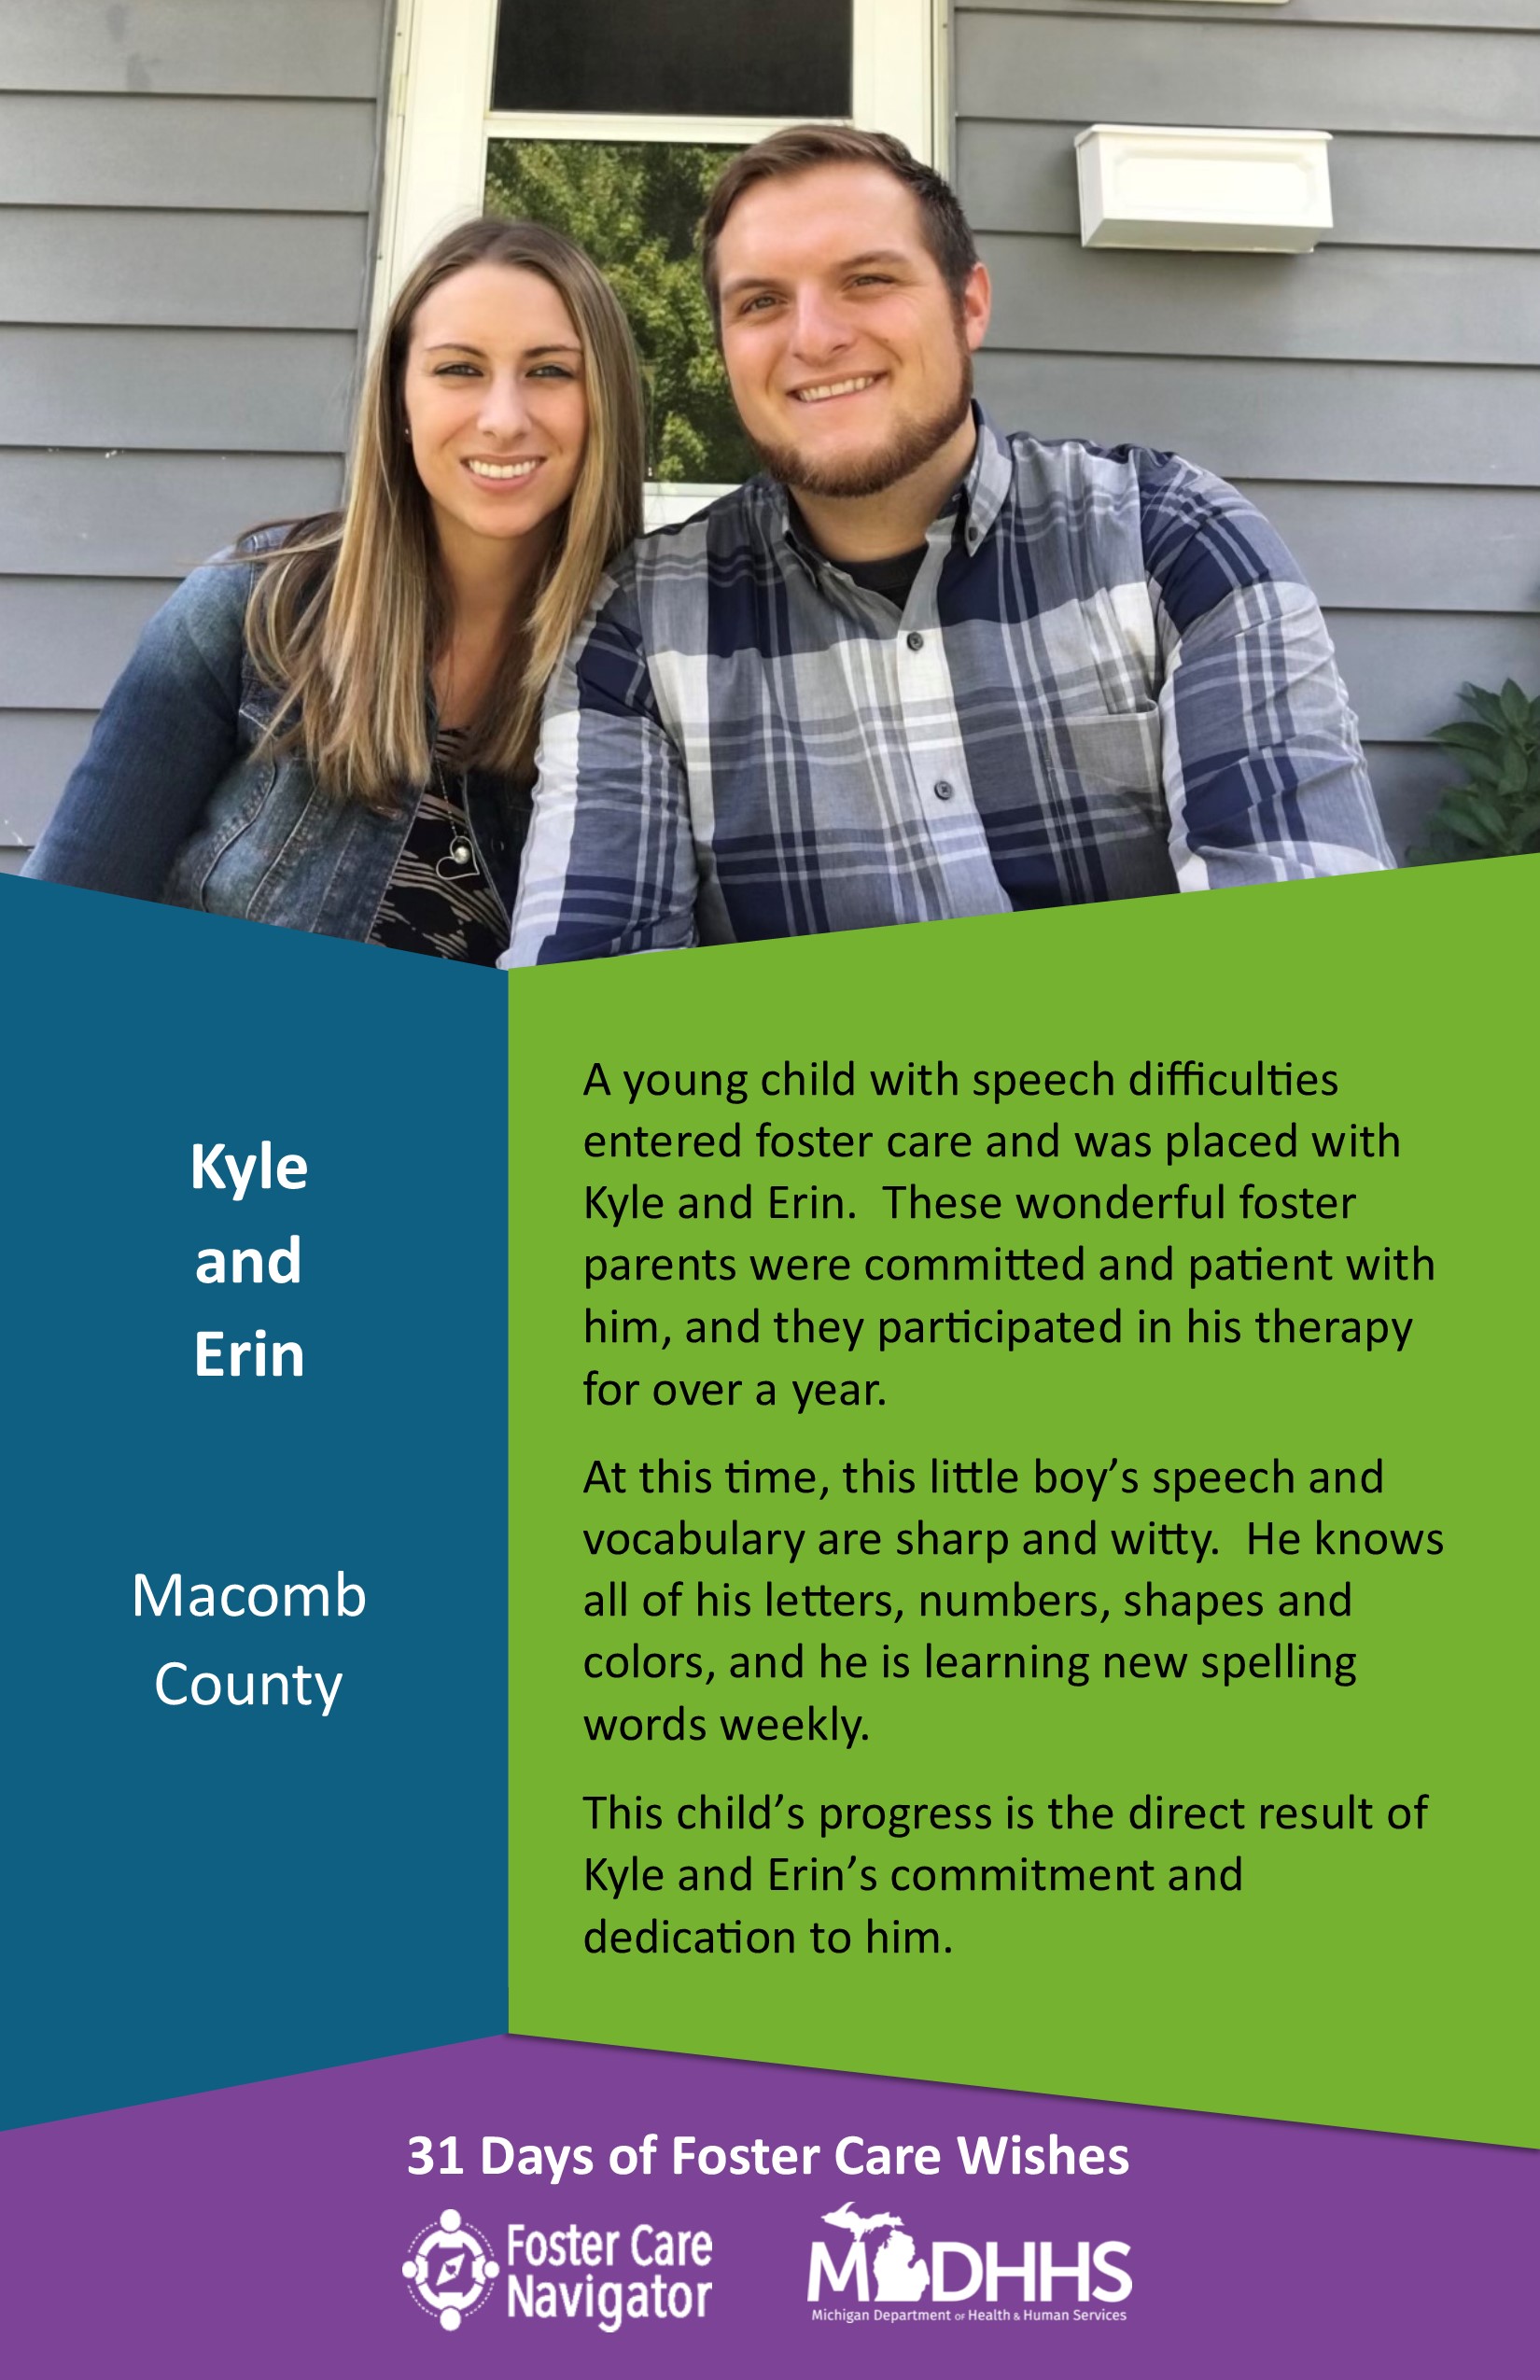 This full page feature includes all of the text listed in the body of this blog post as well as a photo of Kyle and Erin. The background is blue on the left, green on the right, and purple at the bottom of the page where the logos are located.